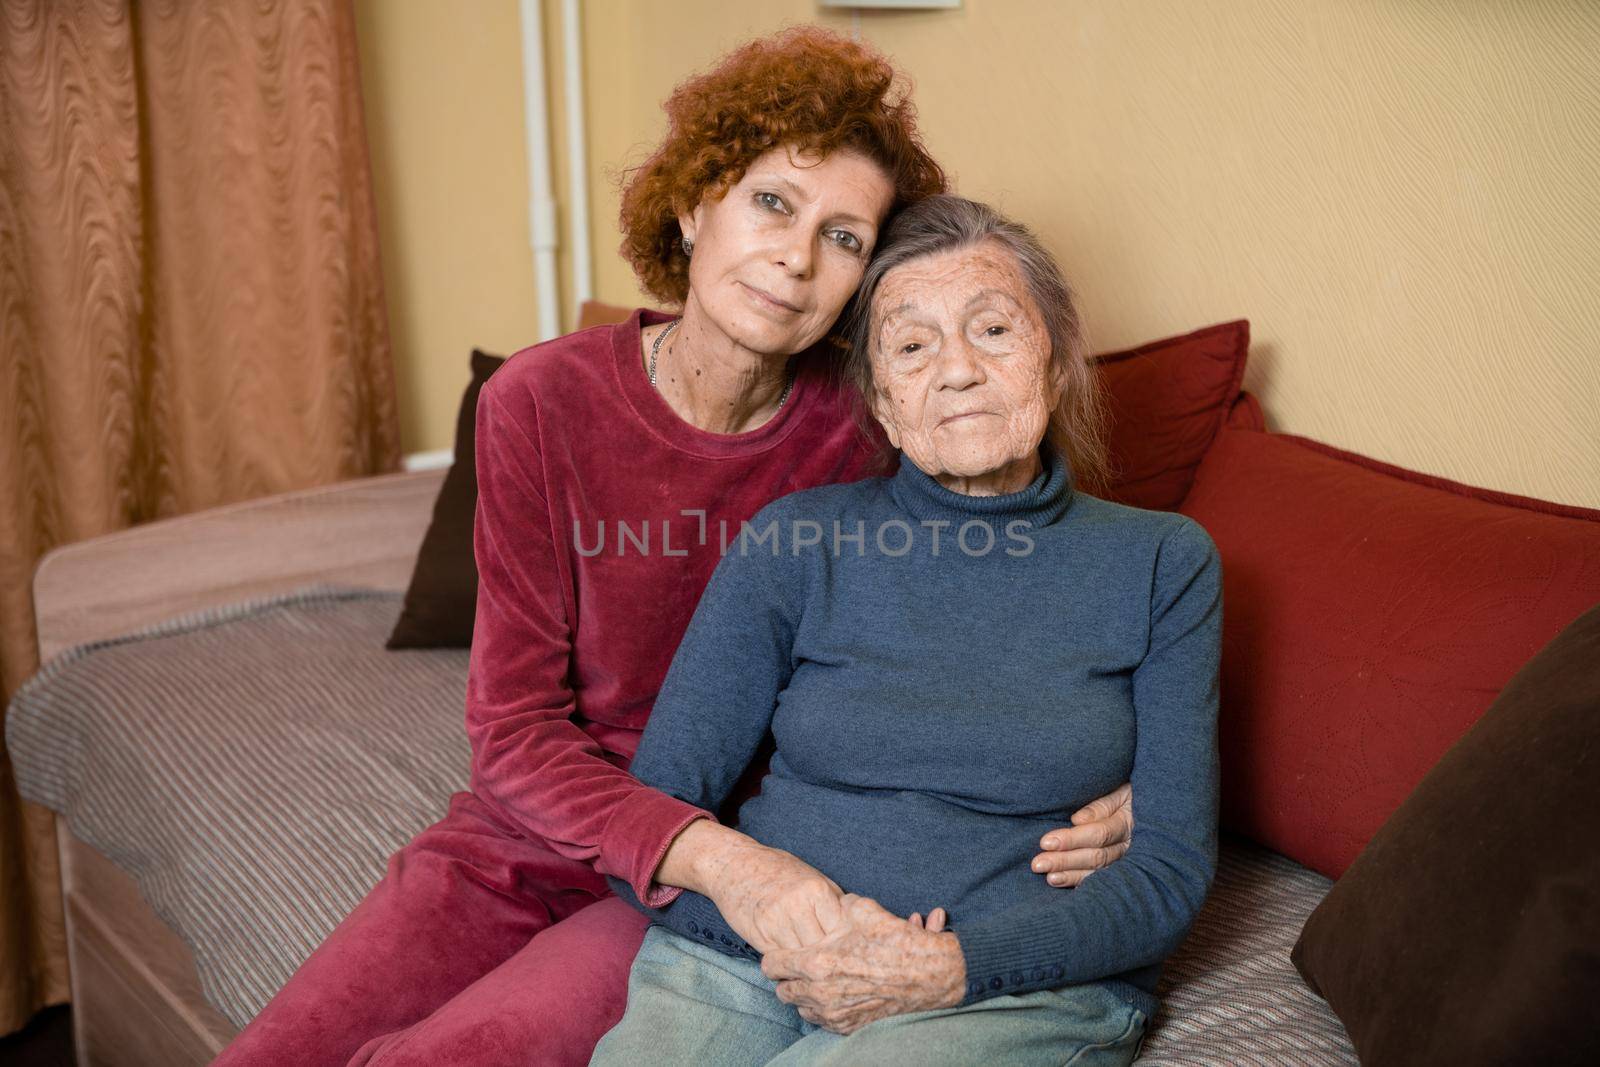 Elderly old cute woman with Alzheimer's very happy and smiling when eldest daughter hugs and takes care of her, at home on sofa. Theme aging and parenting, family relationships and social care oldest.